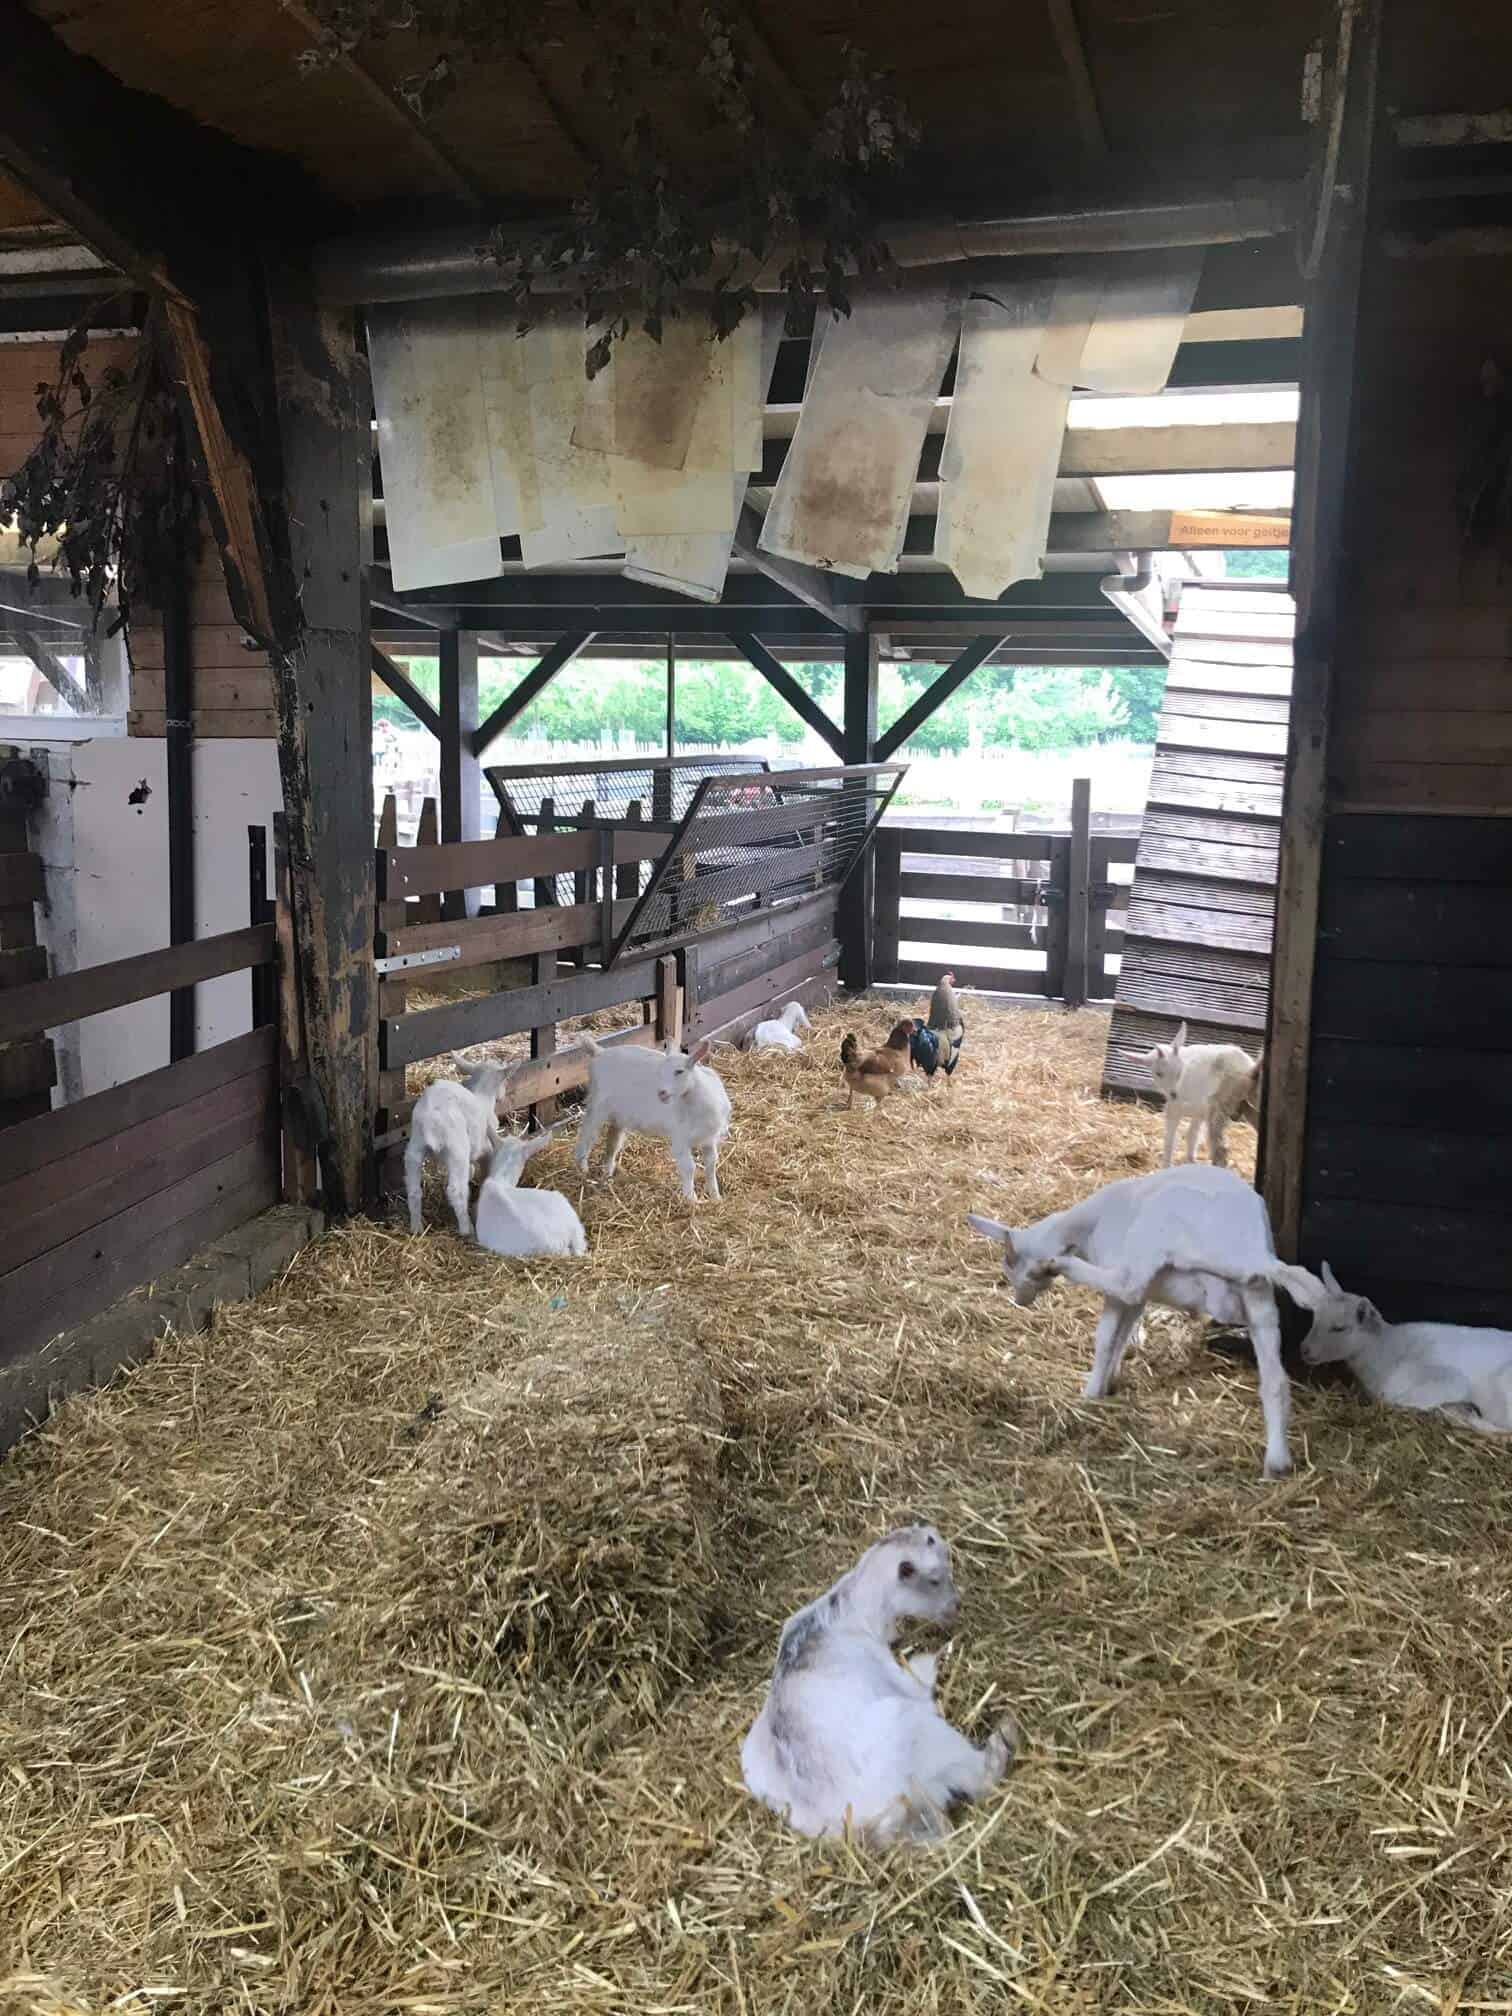 Goat Farm - one of the best free things to do in Amsterdam with kids